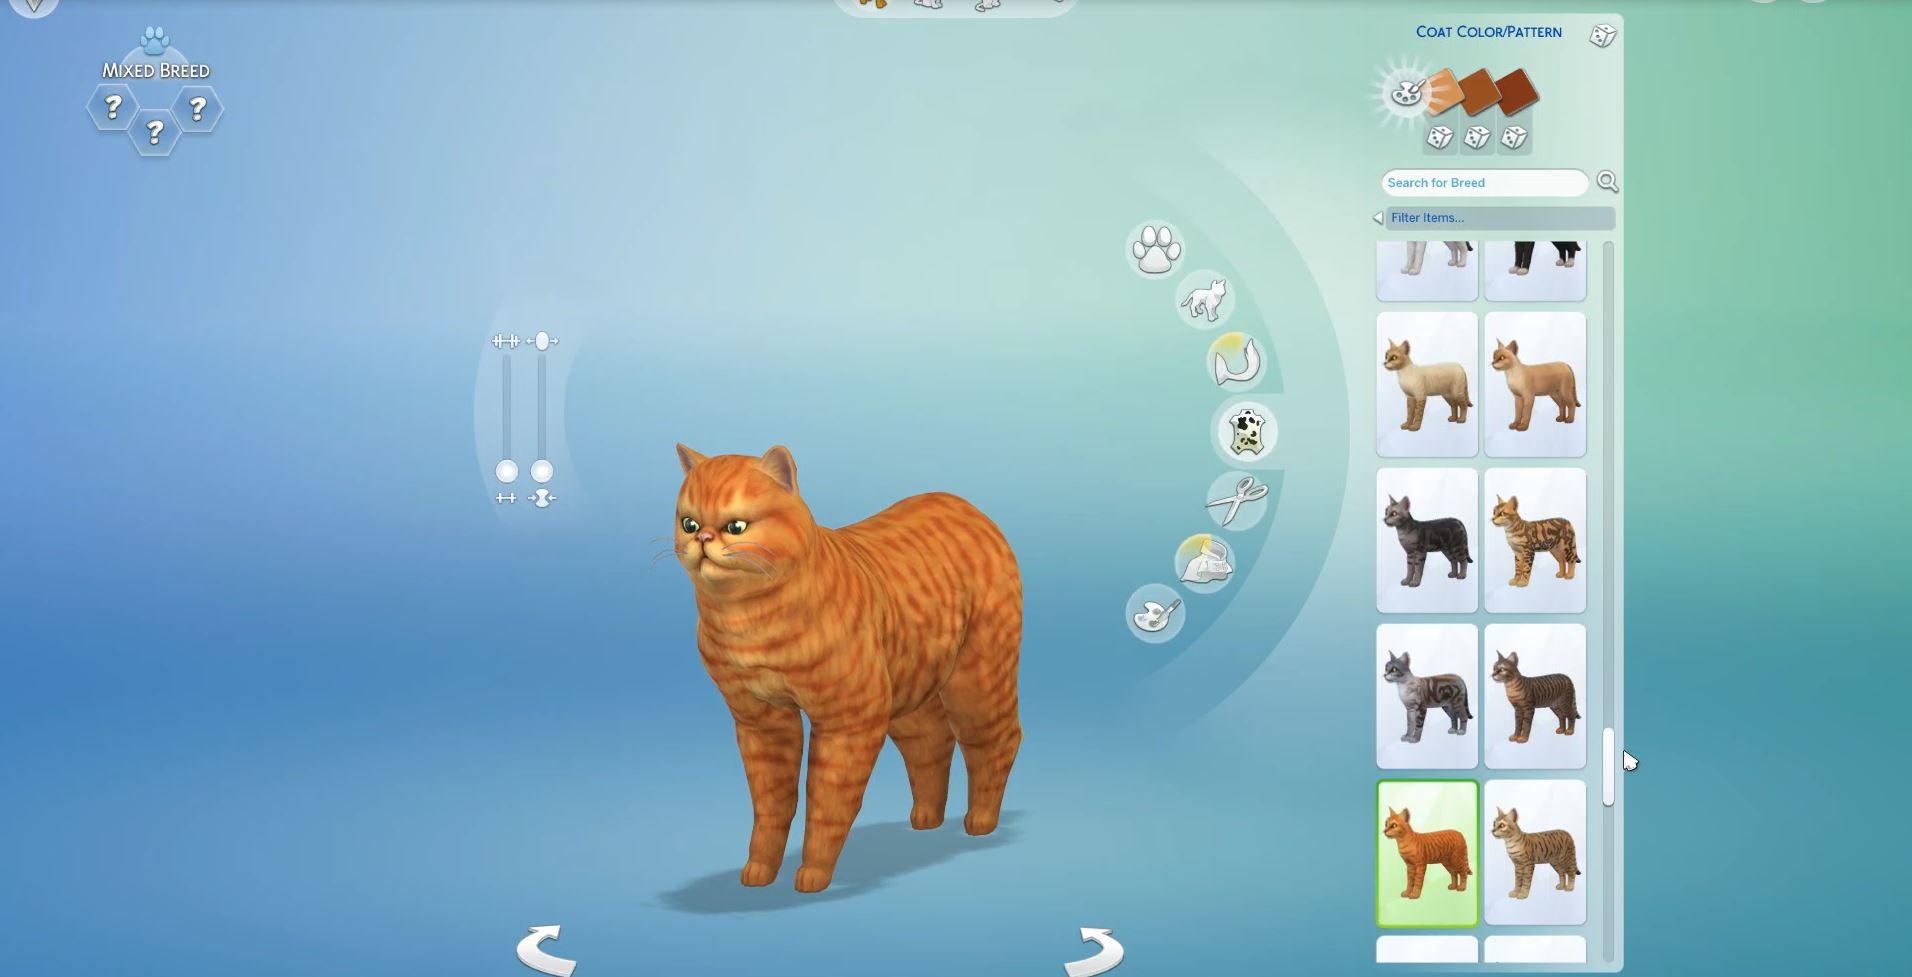 The Sims 4 Cats & Dogs Complete List of Pet Breeds (170